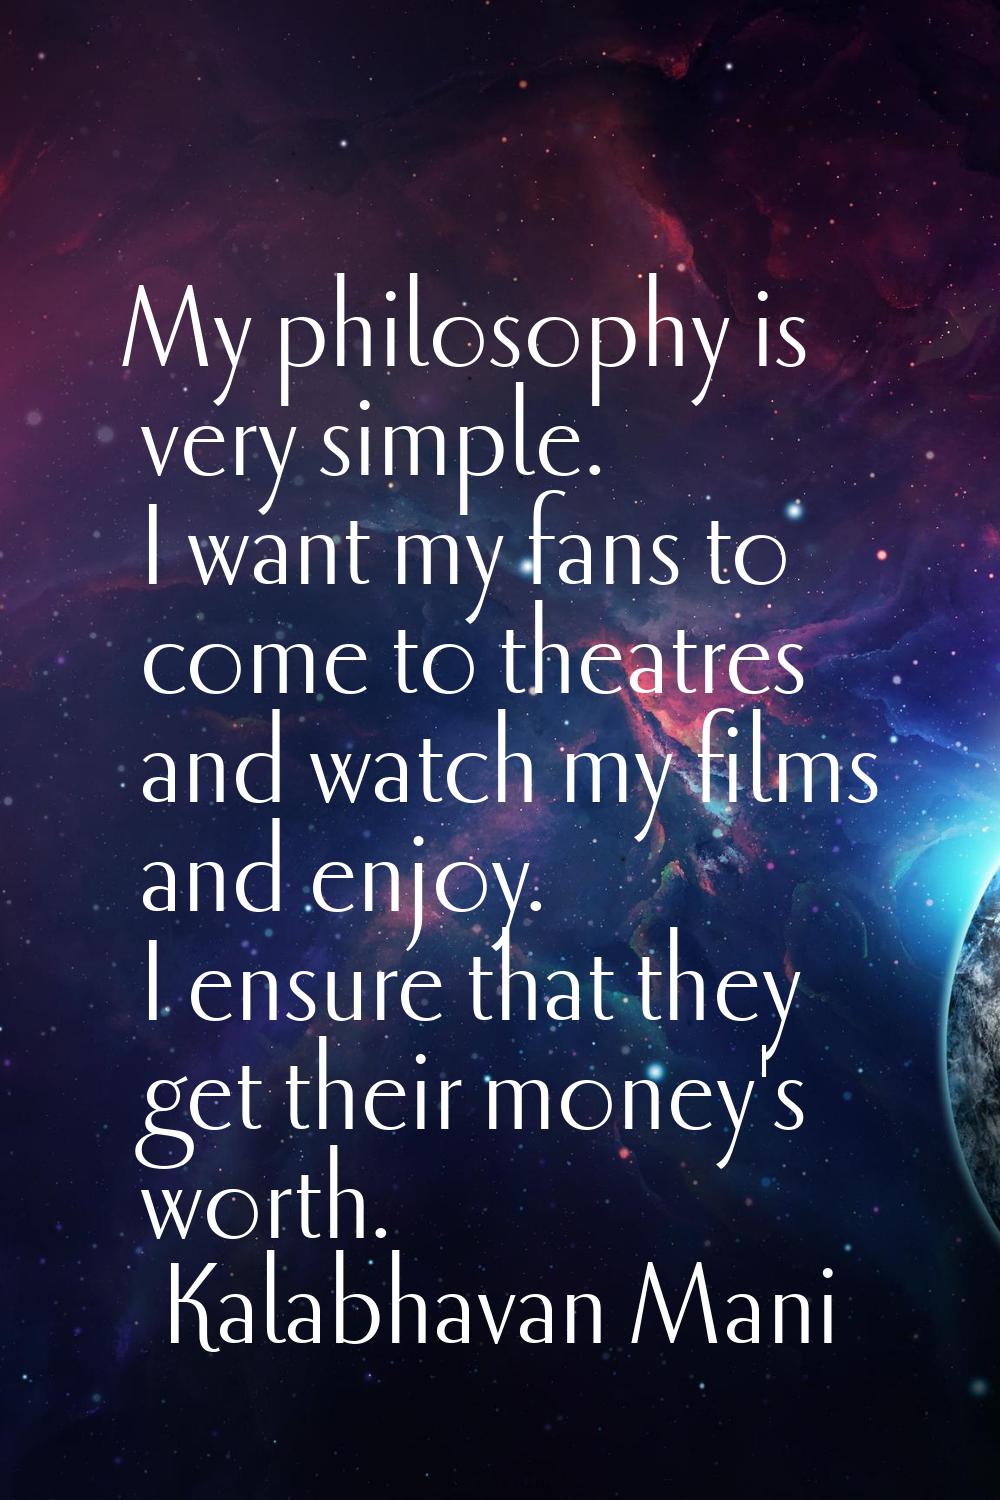 My philosophy is very simple. I want my fans to come to theatres and watch my films and enjoy. I en